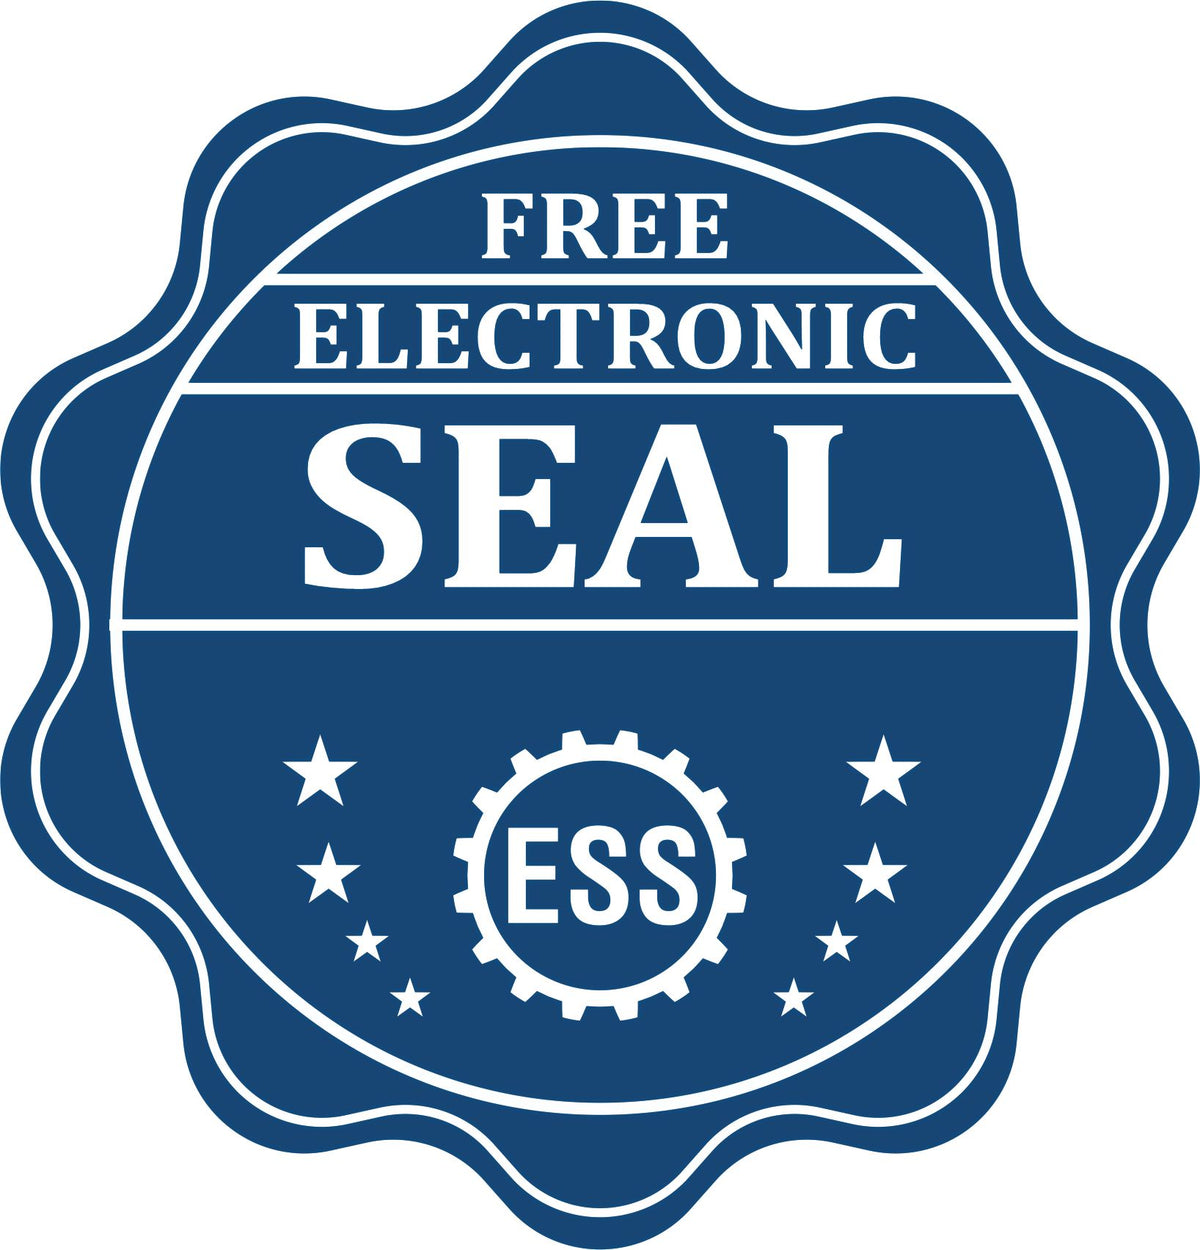 A badge showing a free electronic seal for the Gift Wisconsin Geologist Seal with stars and the ESS gear on the emblem.